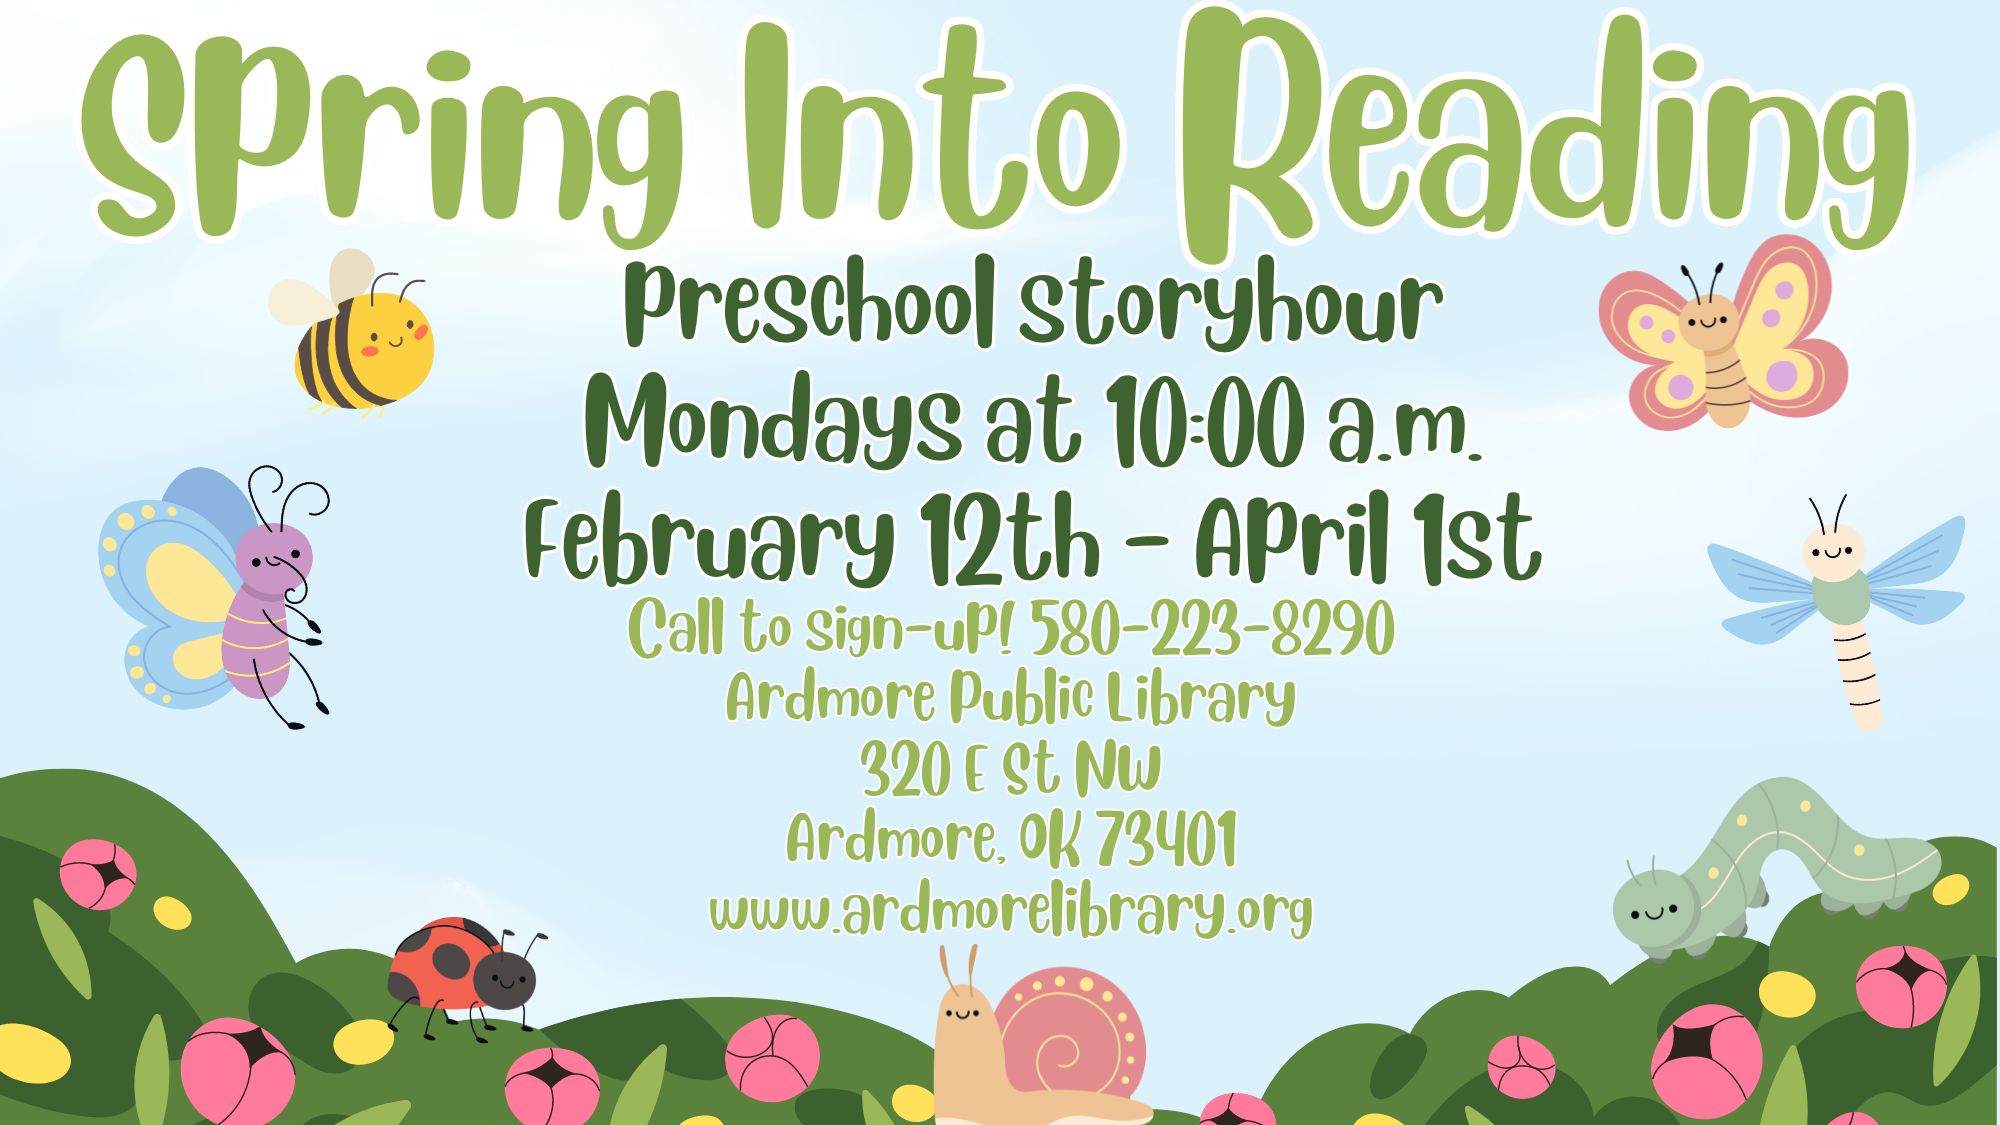 spring storyhour information : begins February 12, on Mondays at 10 a.m.